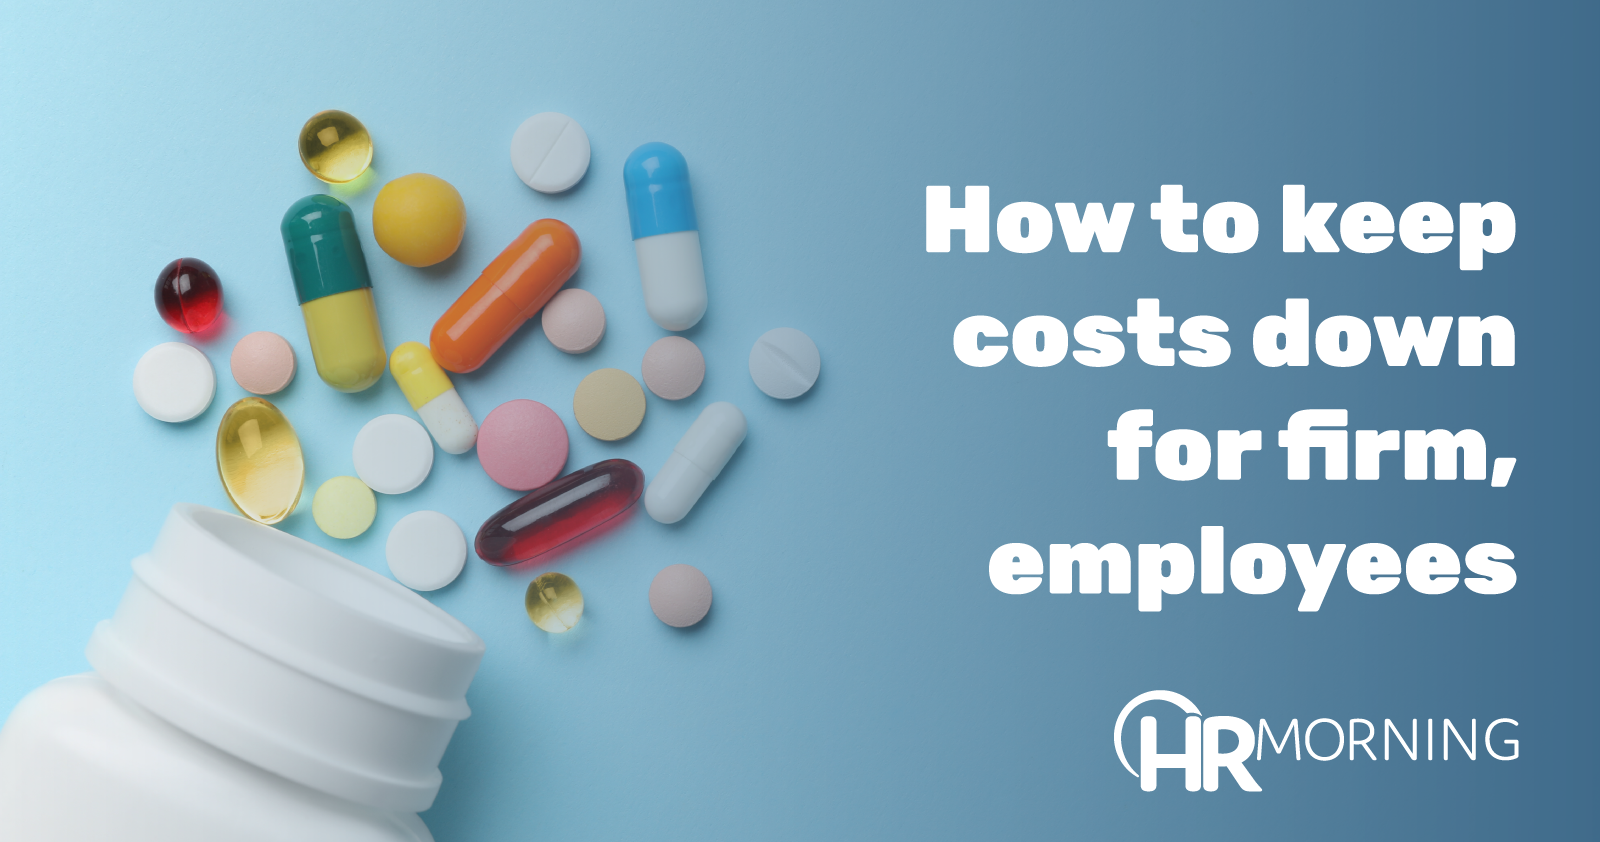 How To Keep Costs Down For Firm Employees